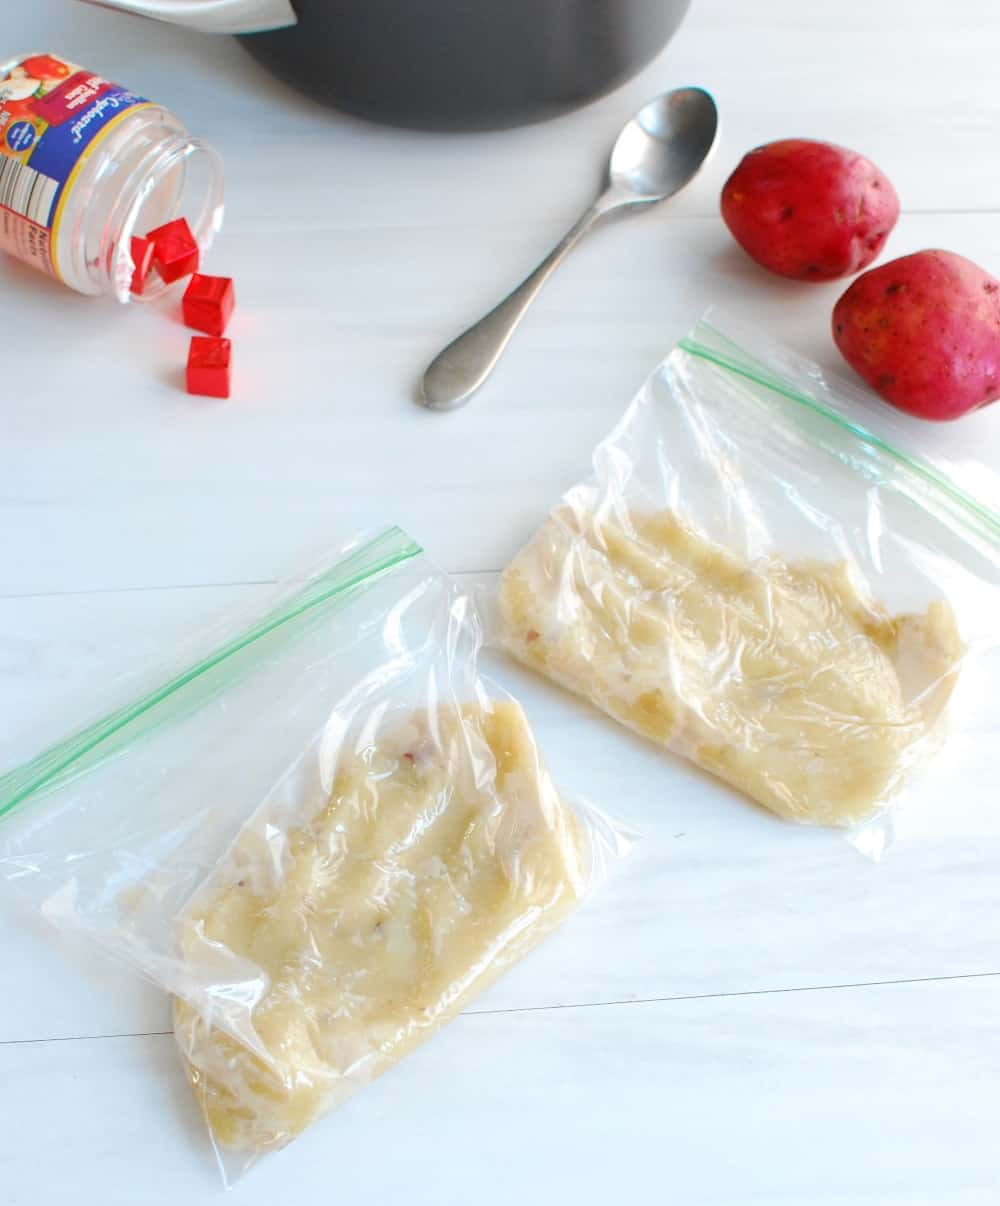 Race Potatoes in Baggies to use for running or cyling